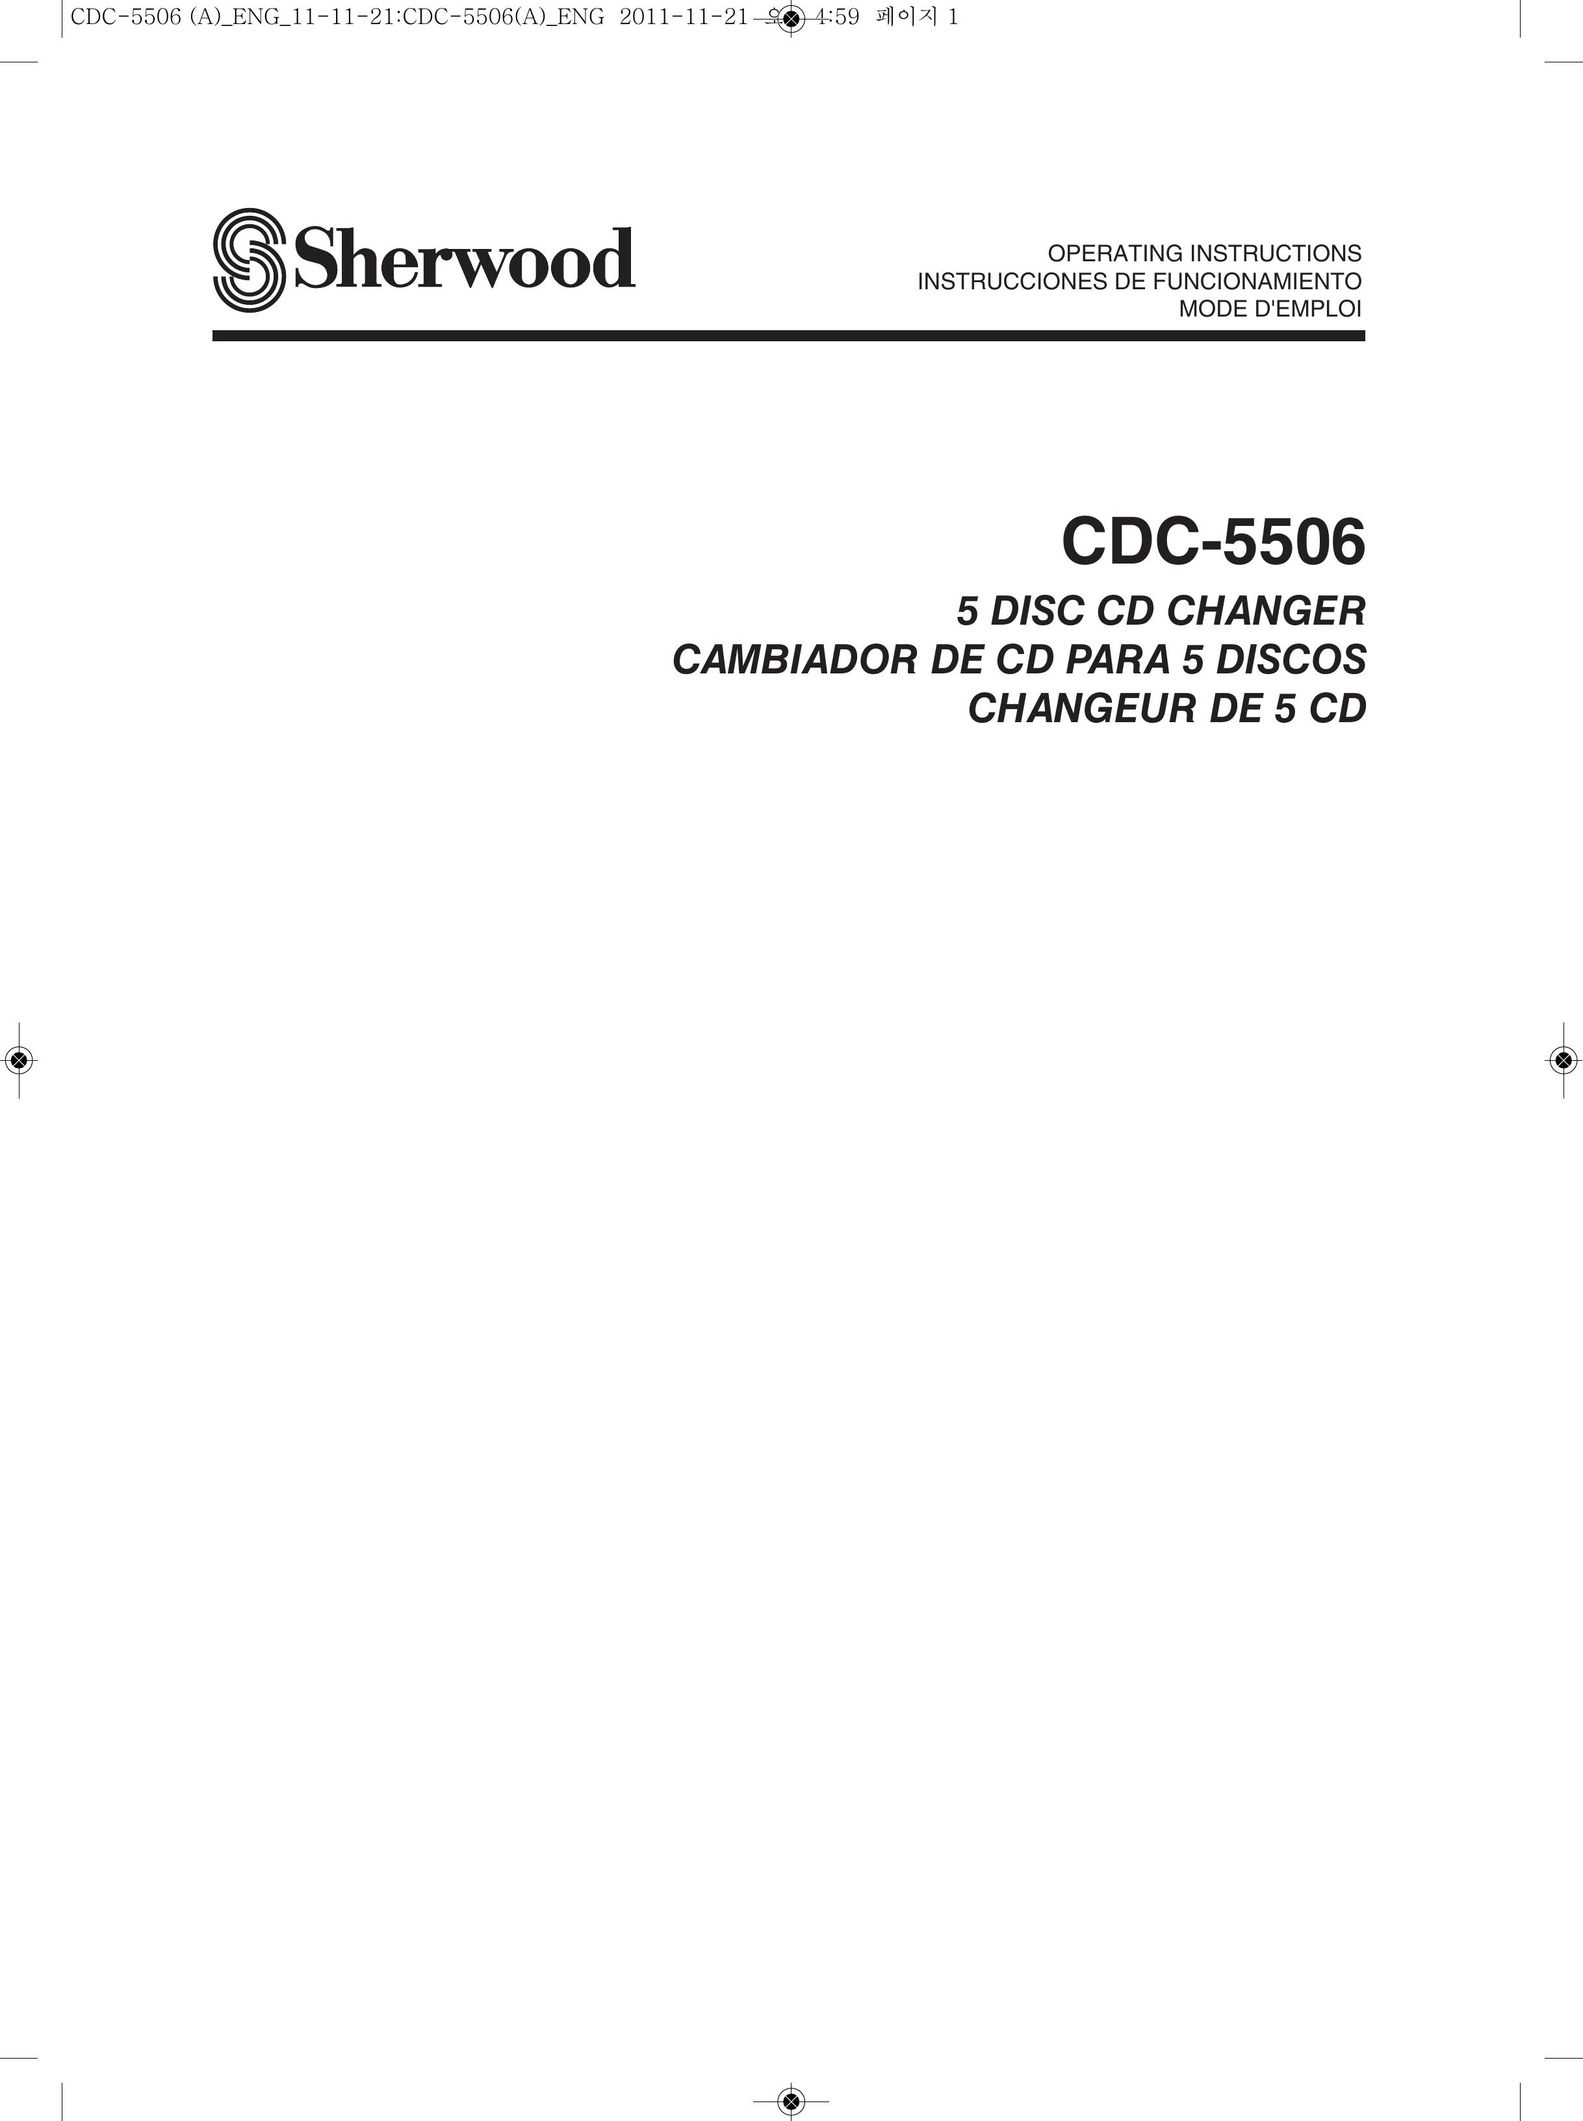 Sherwood CDC-5506 Car Stereo System User Manual